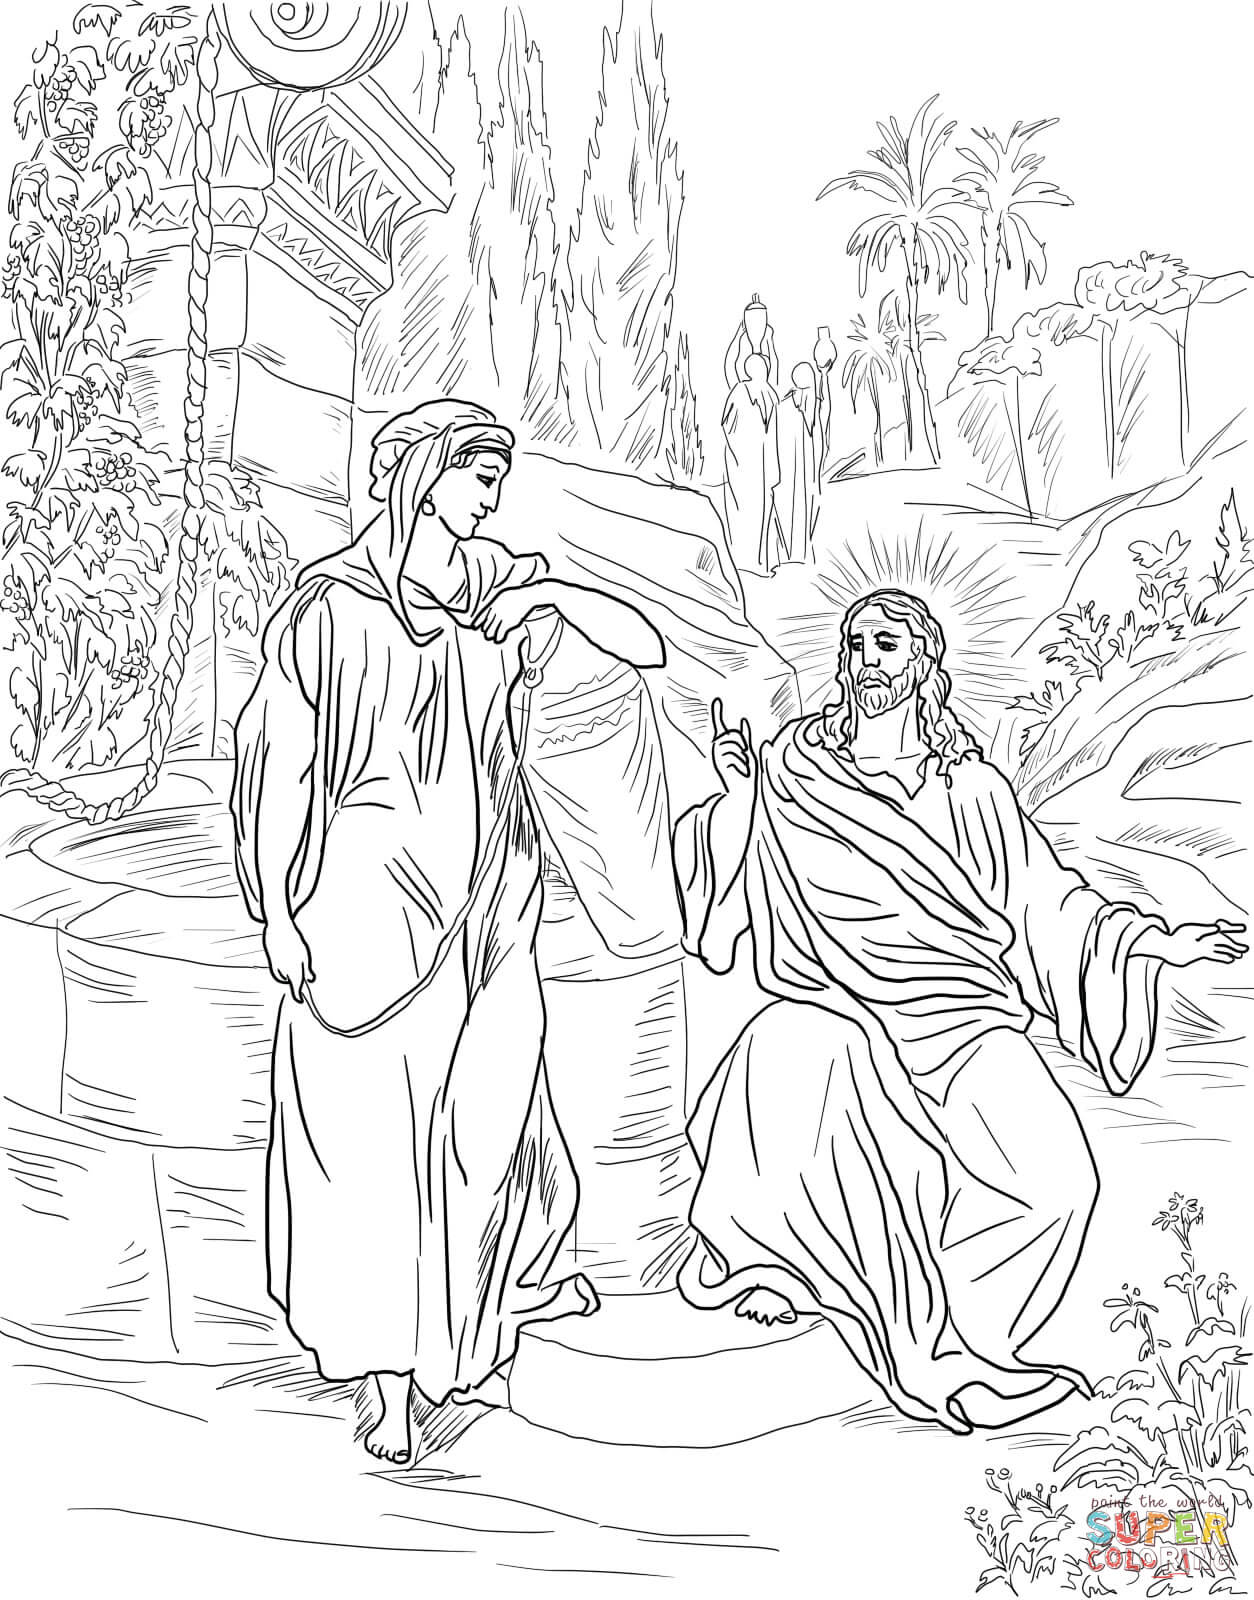 Woman at the Well Coloring Page